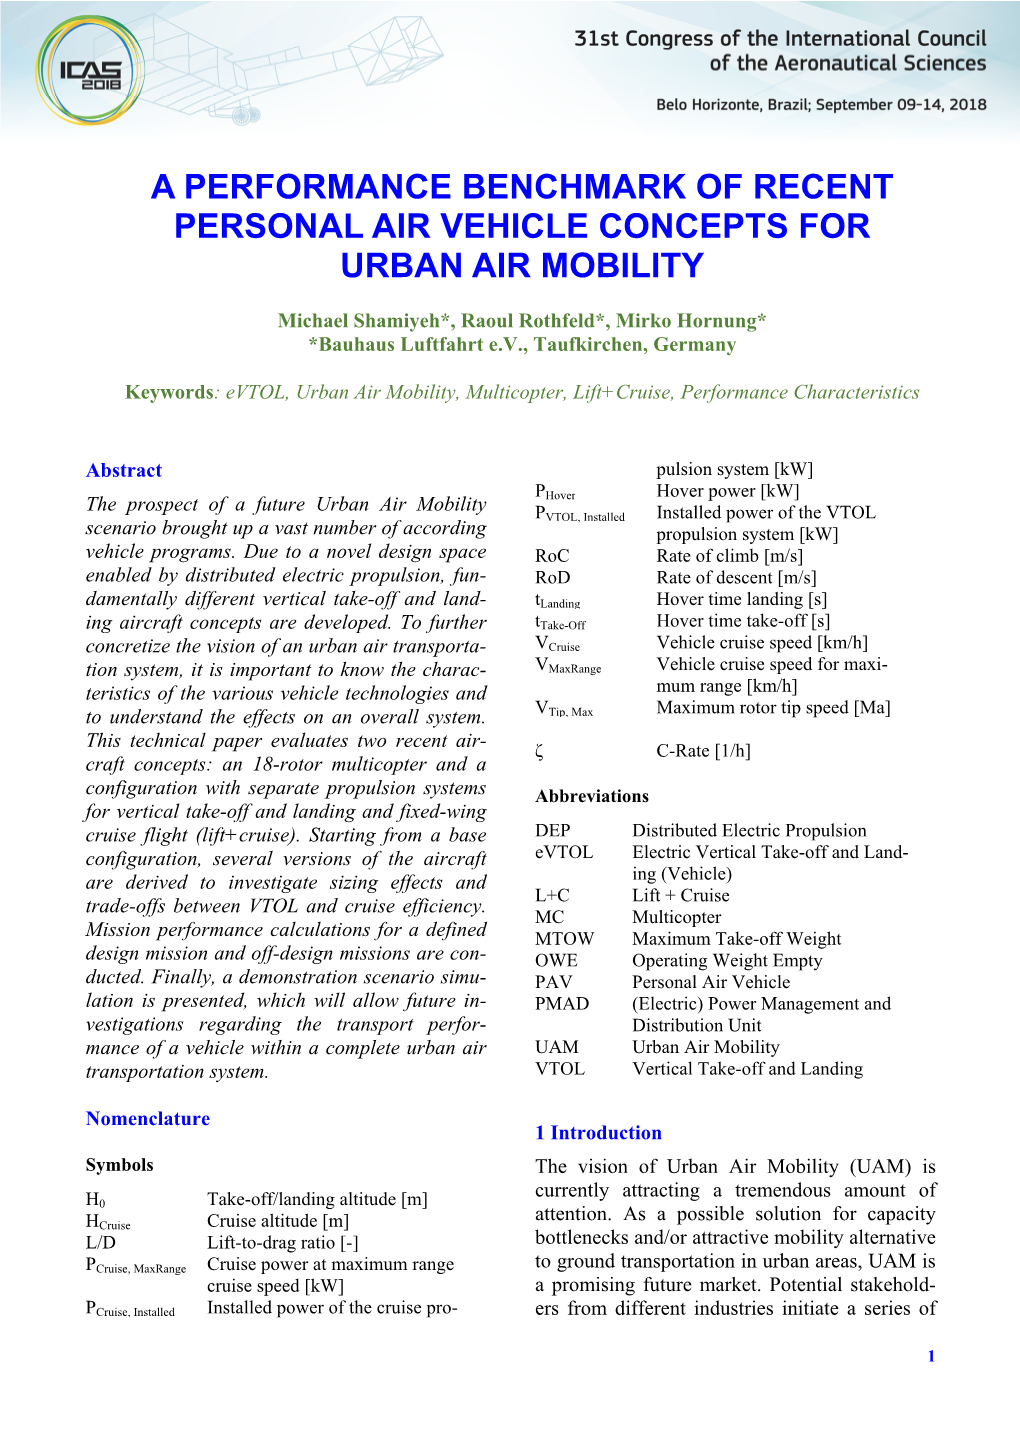 A Performance Benchmark of Recent Personal Air Vehicle Concepts for Urban Air Mobility